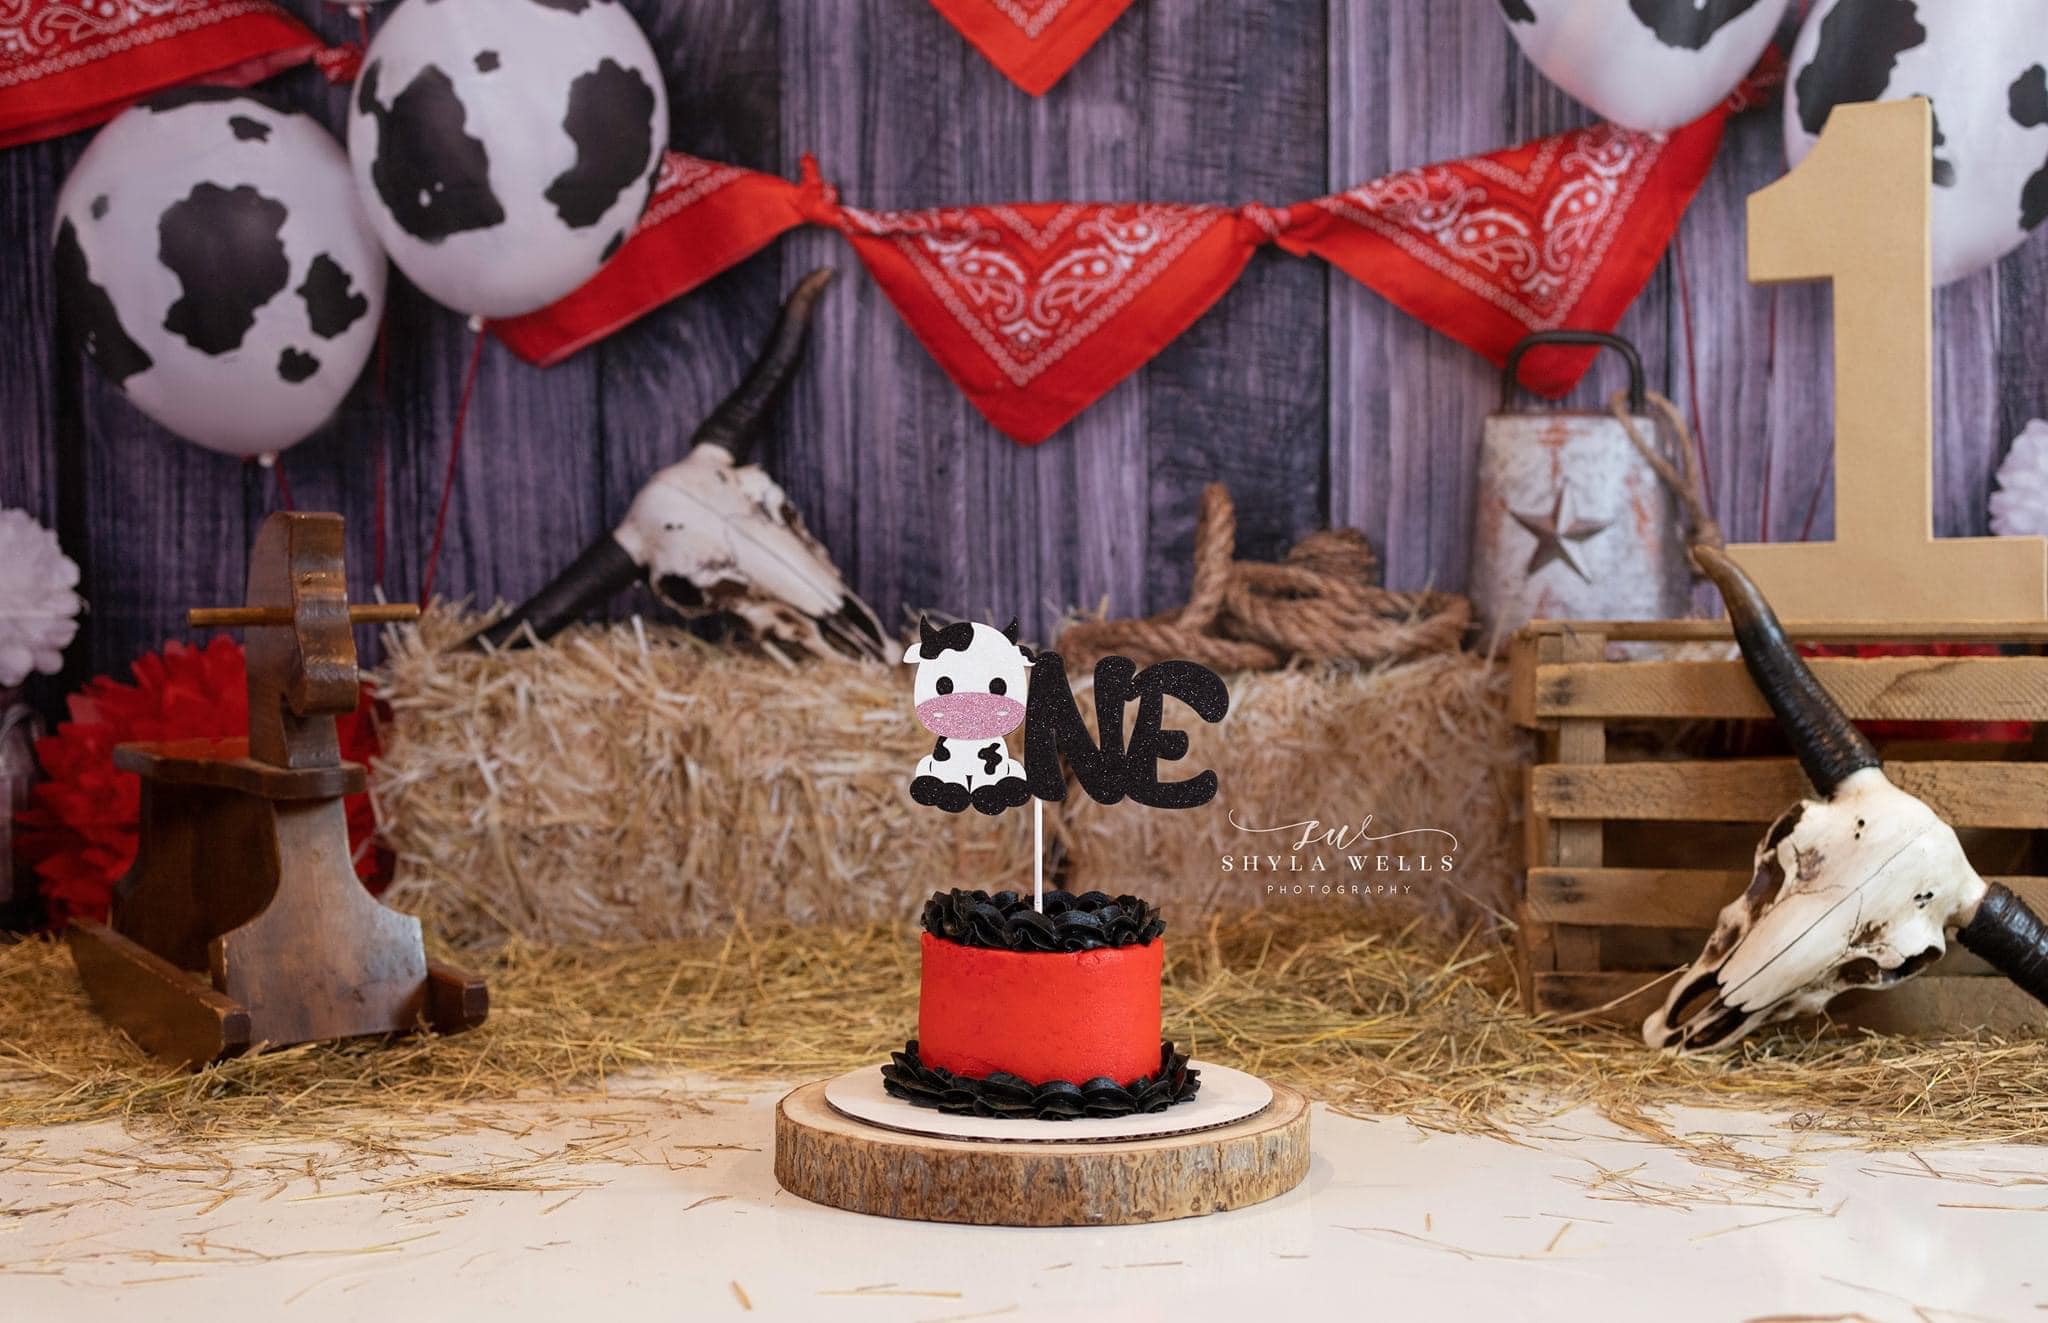 Kate Farm Cowboy Red Decorations Backdrop for Photography